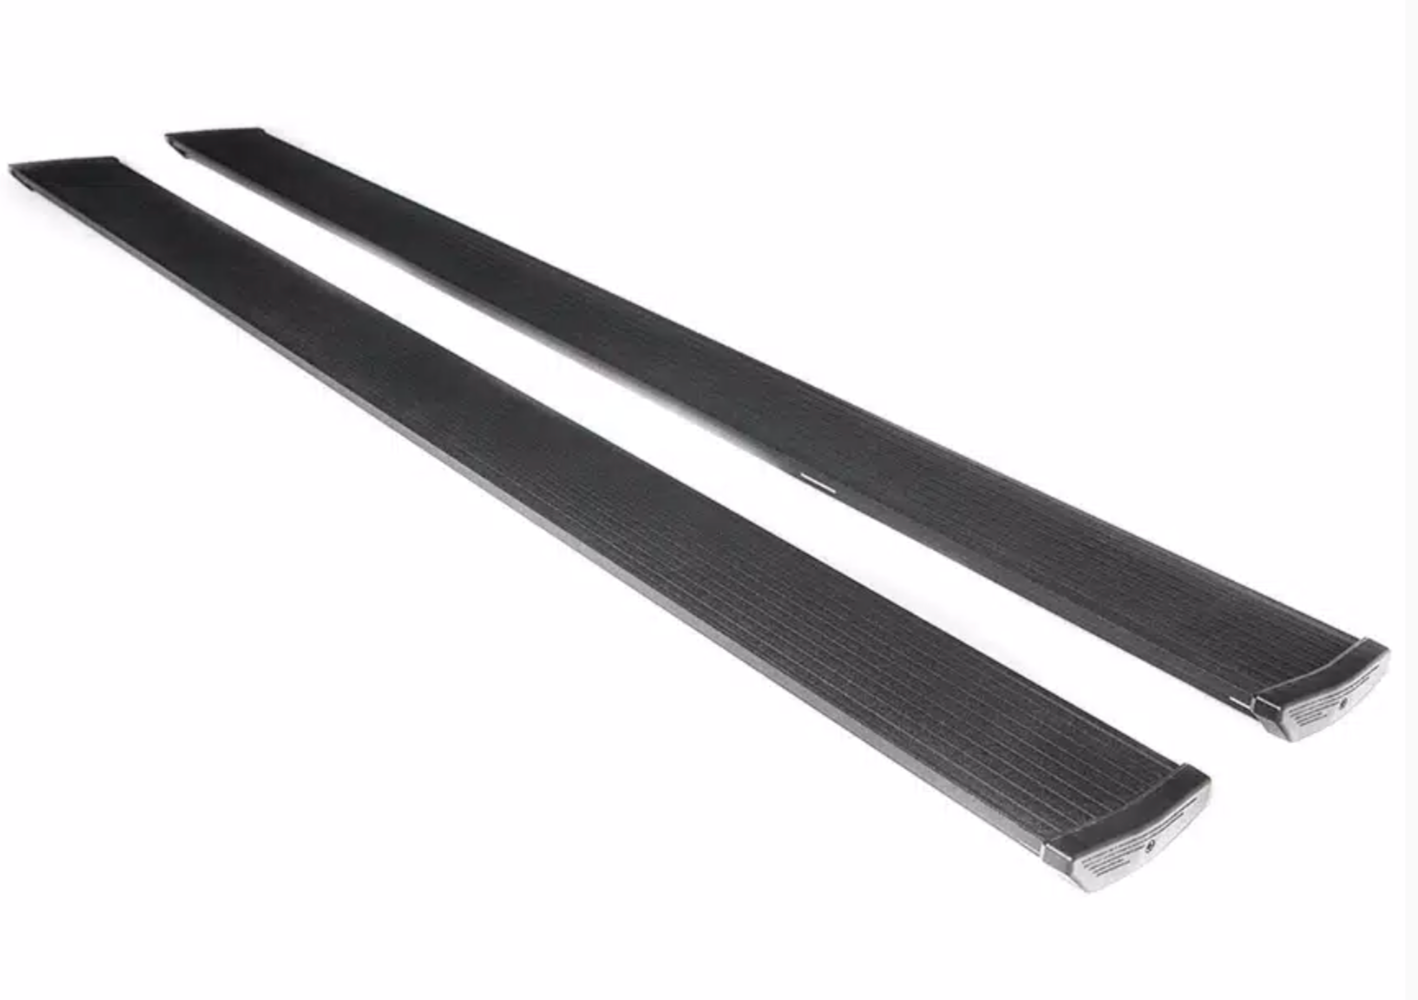 AMP RESEARCH POWER STEP RUNNING BOARDS W PLUG & PLAY